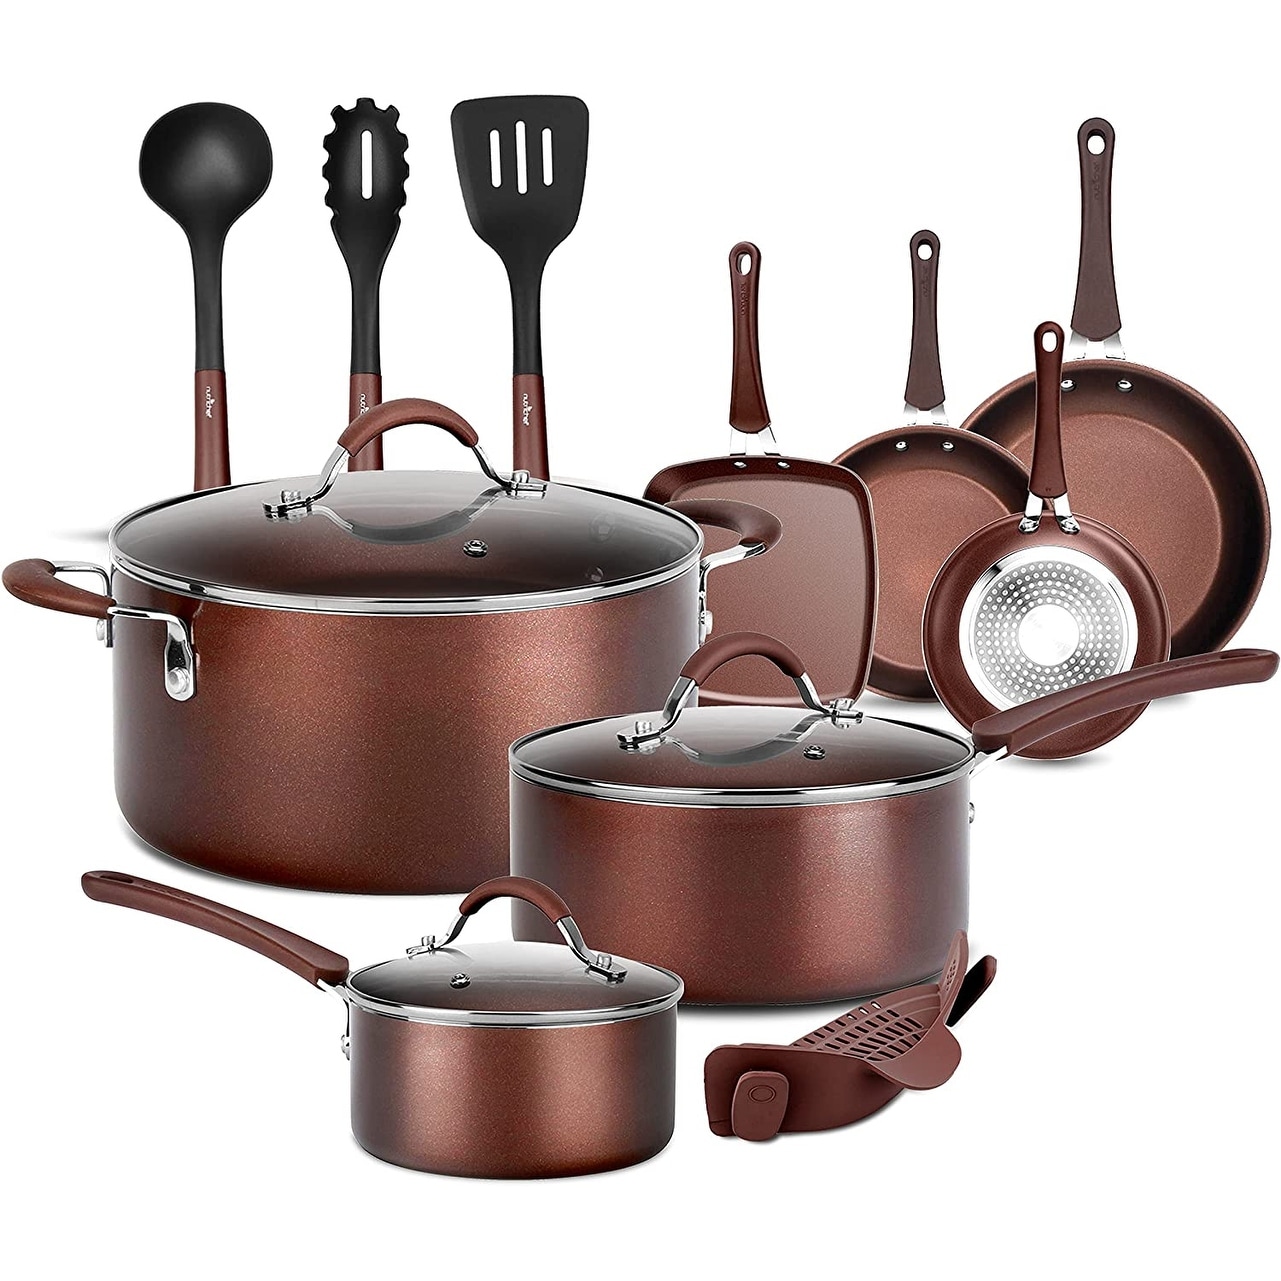 NutriChef Metallic Ridge Line Nonstick Cooking Kitchen Cookware Pots and  Pan Set with with Lids and Utensils, 12 Piece Set, Gray